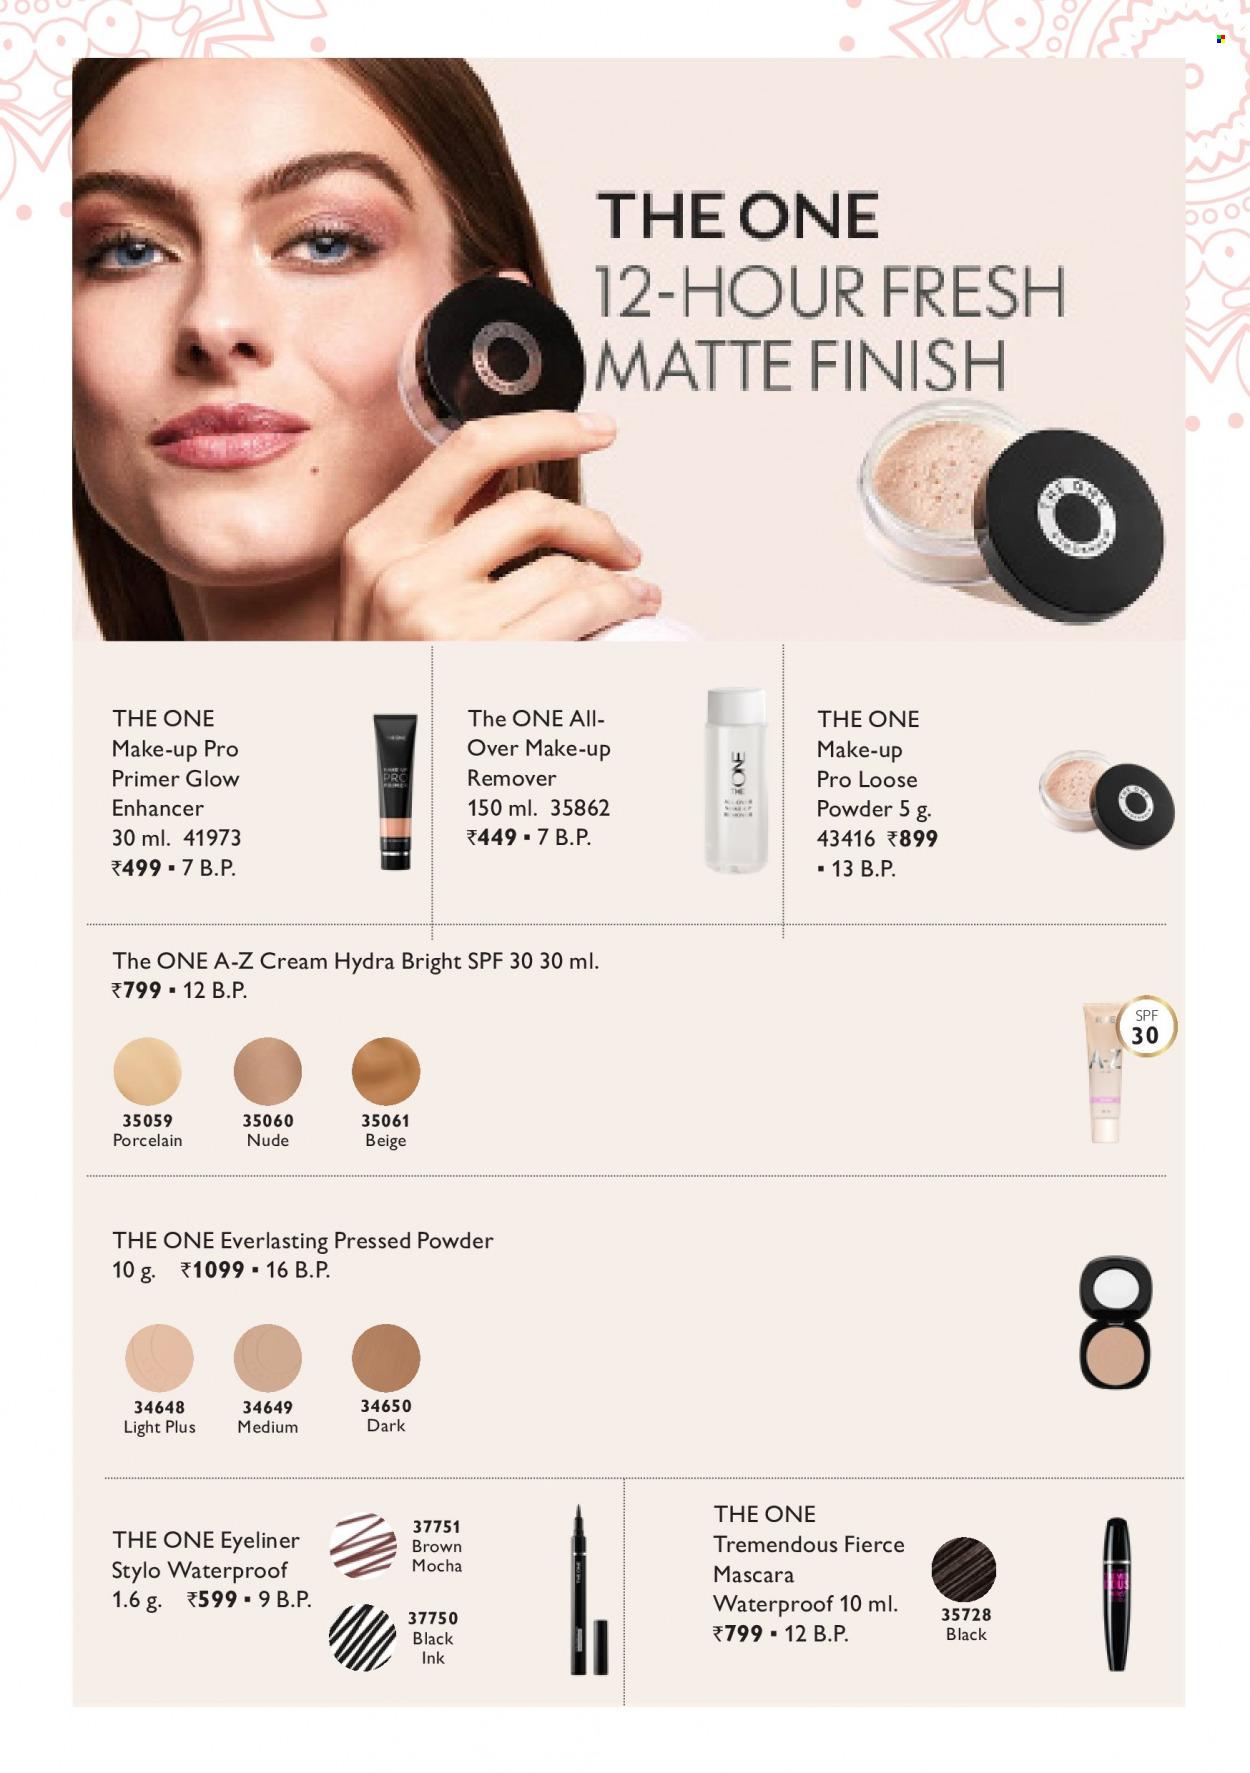 Oriflame offer - 01.10.2022 - 31.10.2022